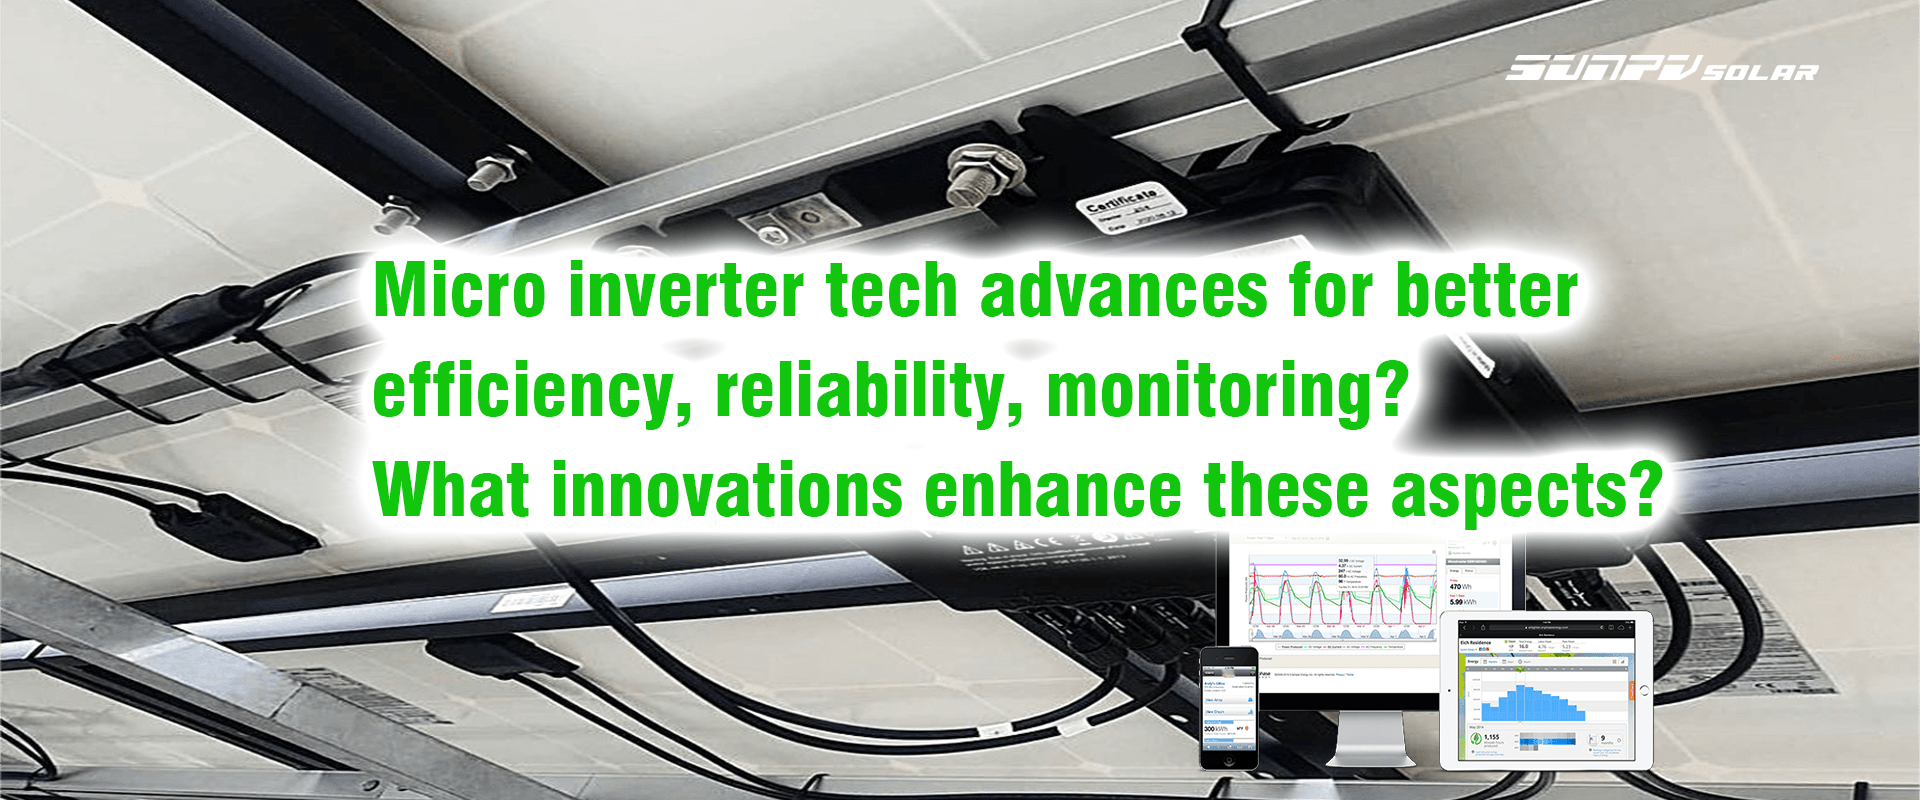 Micro inverter tech advances for better efficiency, reliability, monitoring? What innovations enhance these aspects?